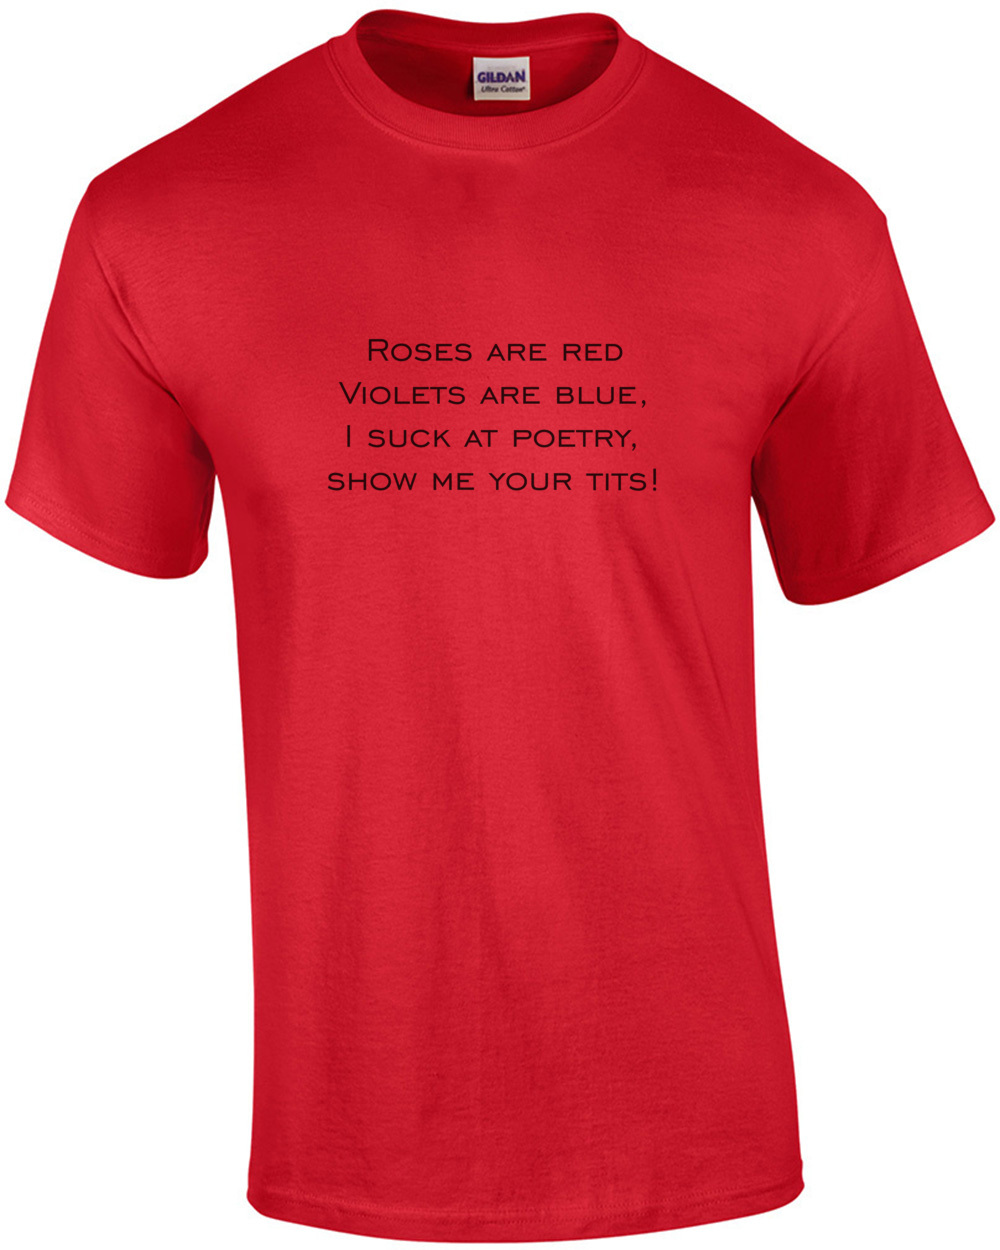 Roses Are Red Violets Are Blue I Suck At Poetry Show Me Your Tits Shirt Ebay